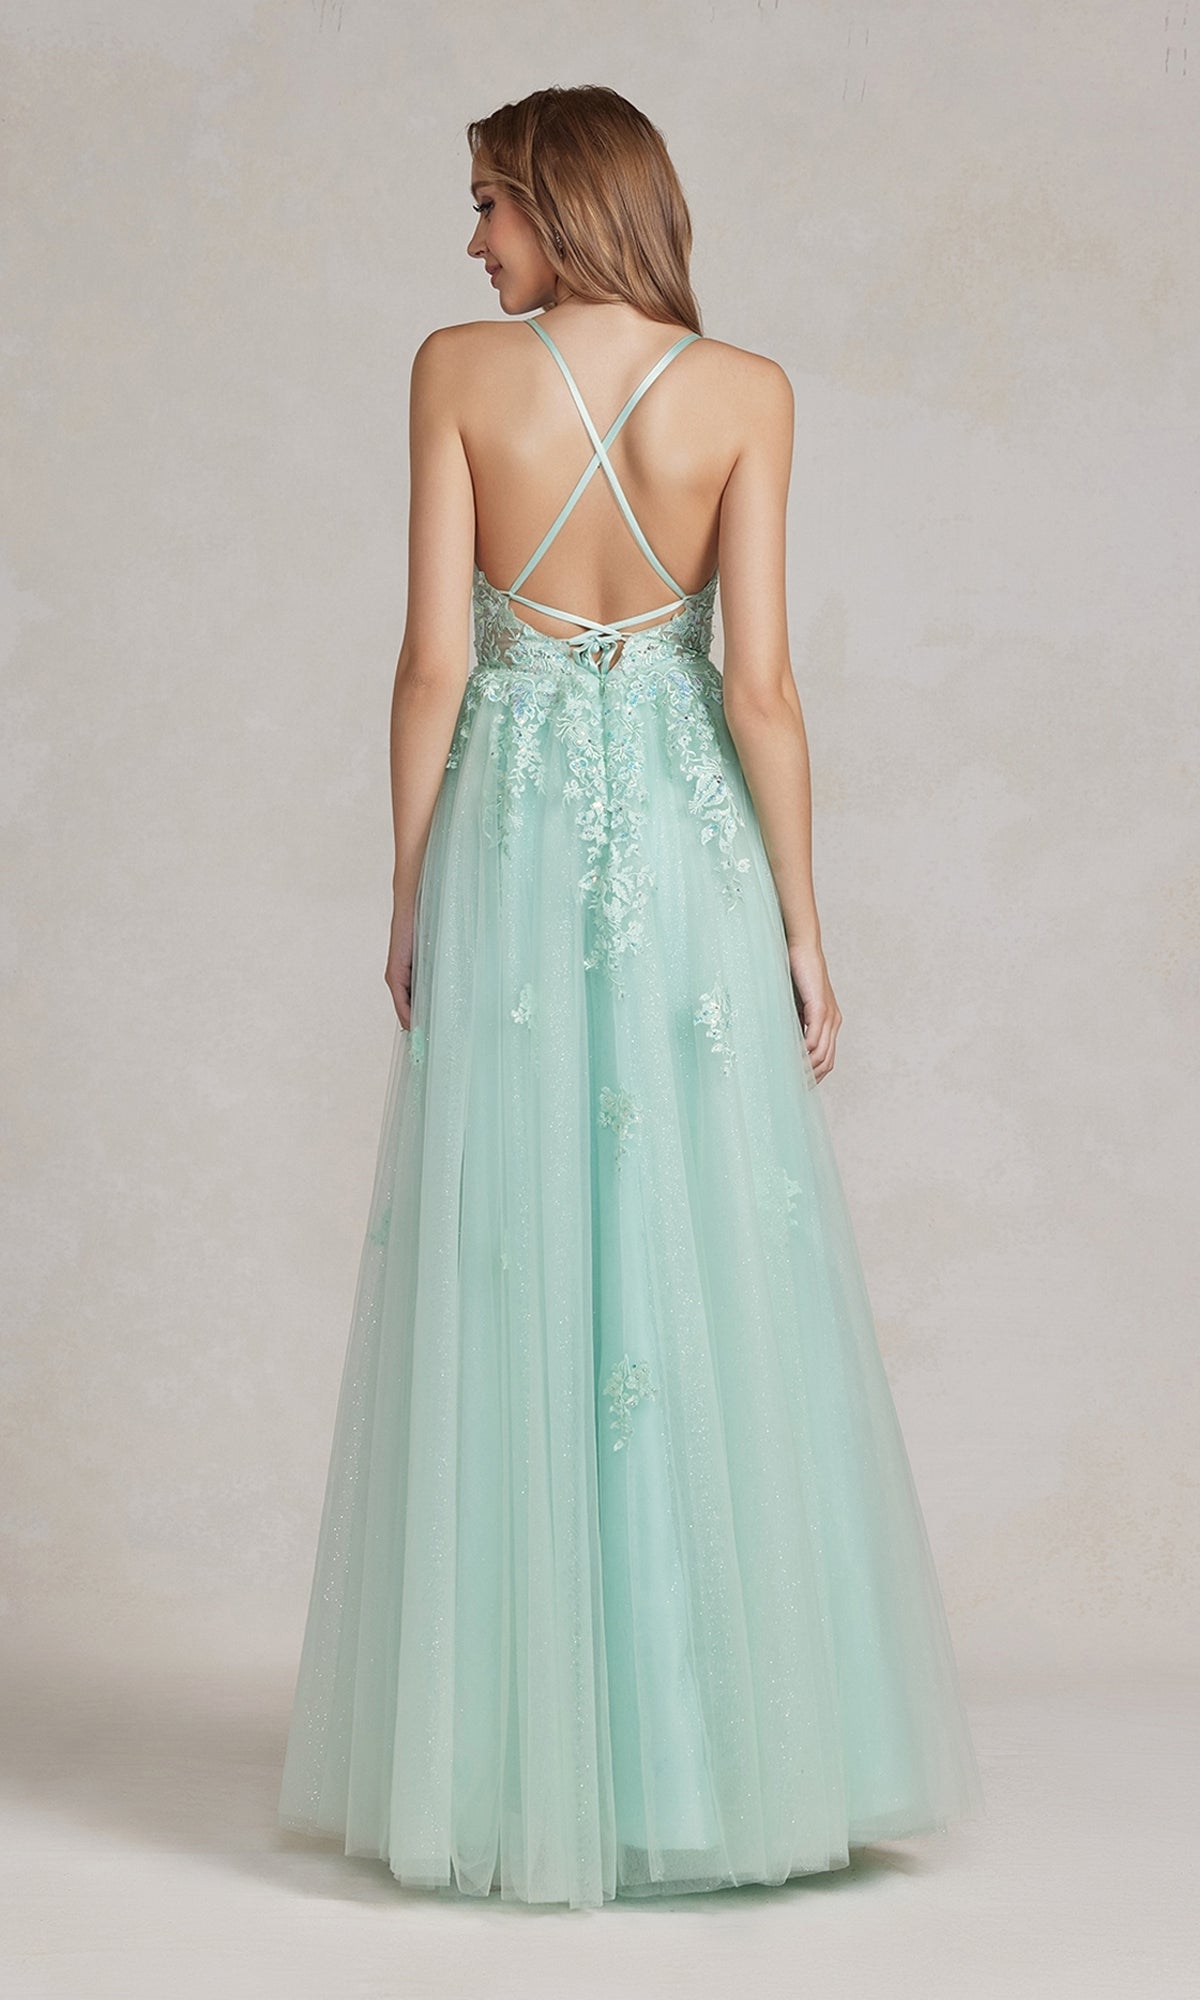  Sheer-Corset Long Embroidered A-Line Prom Dress